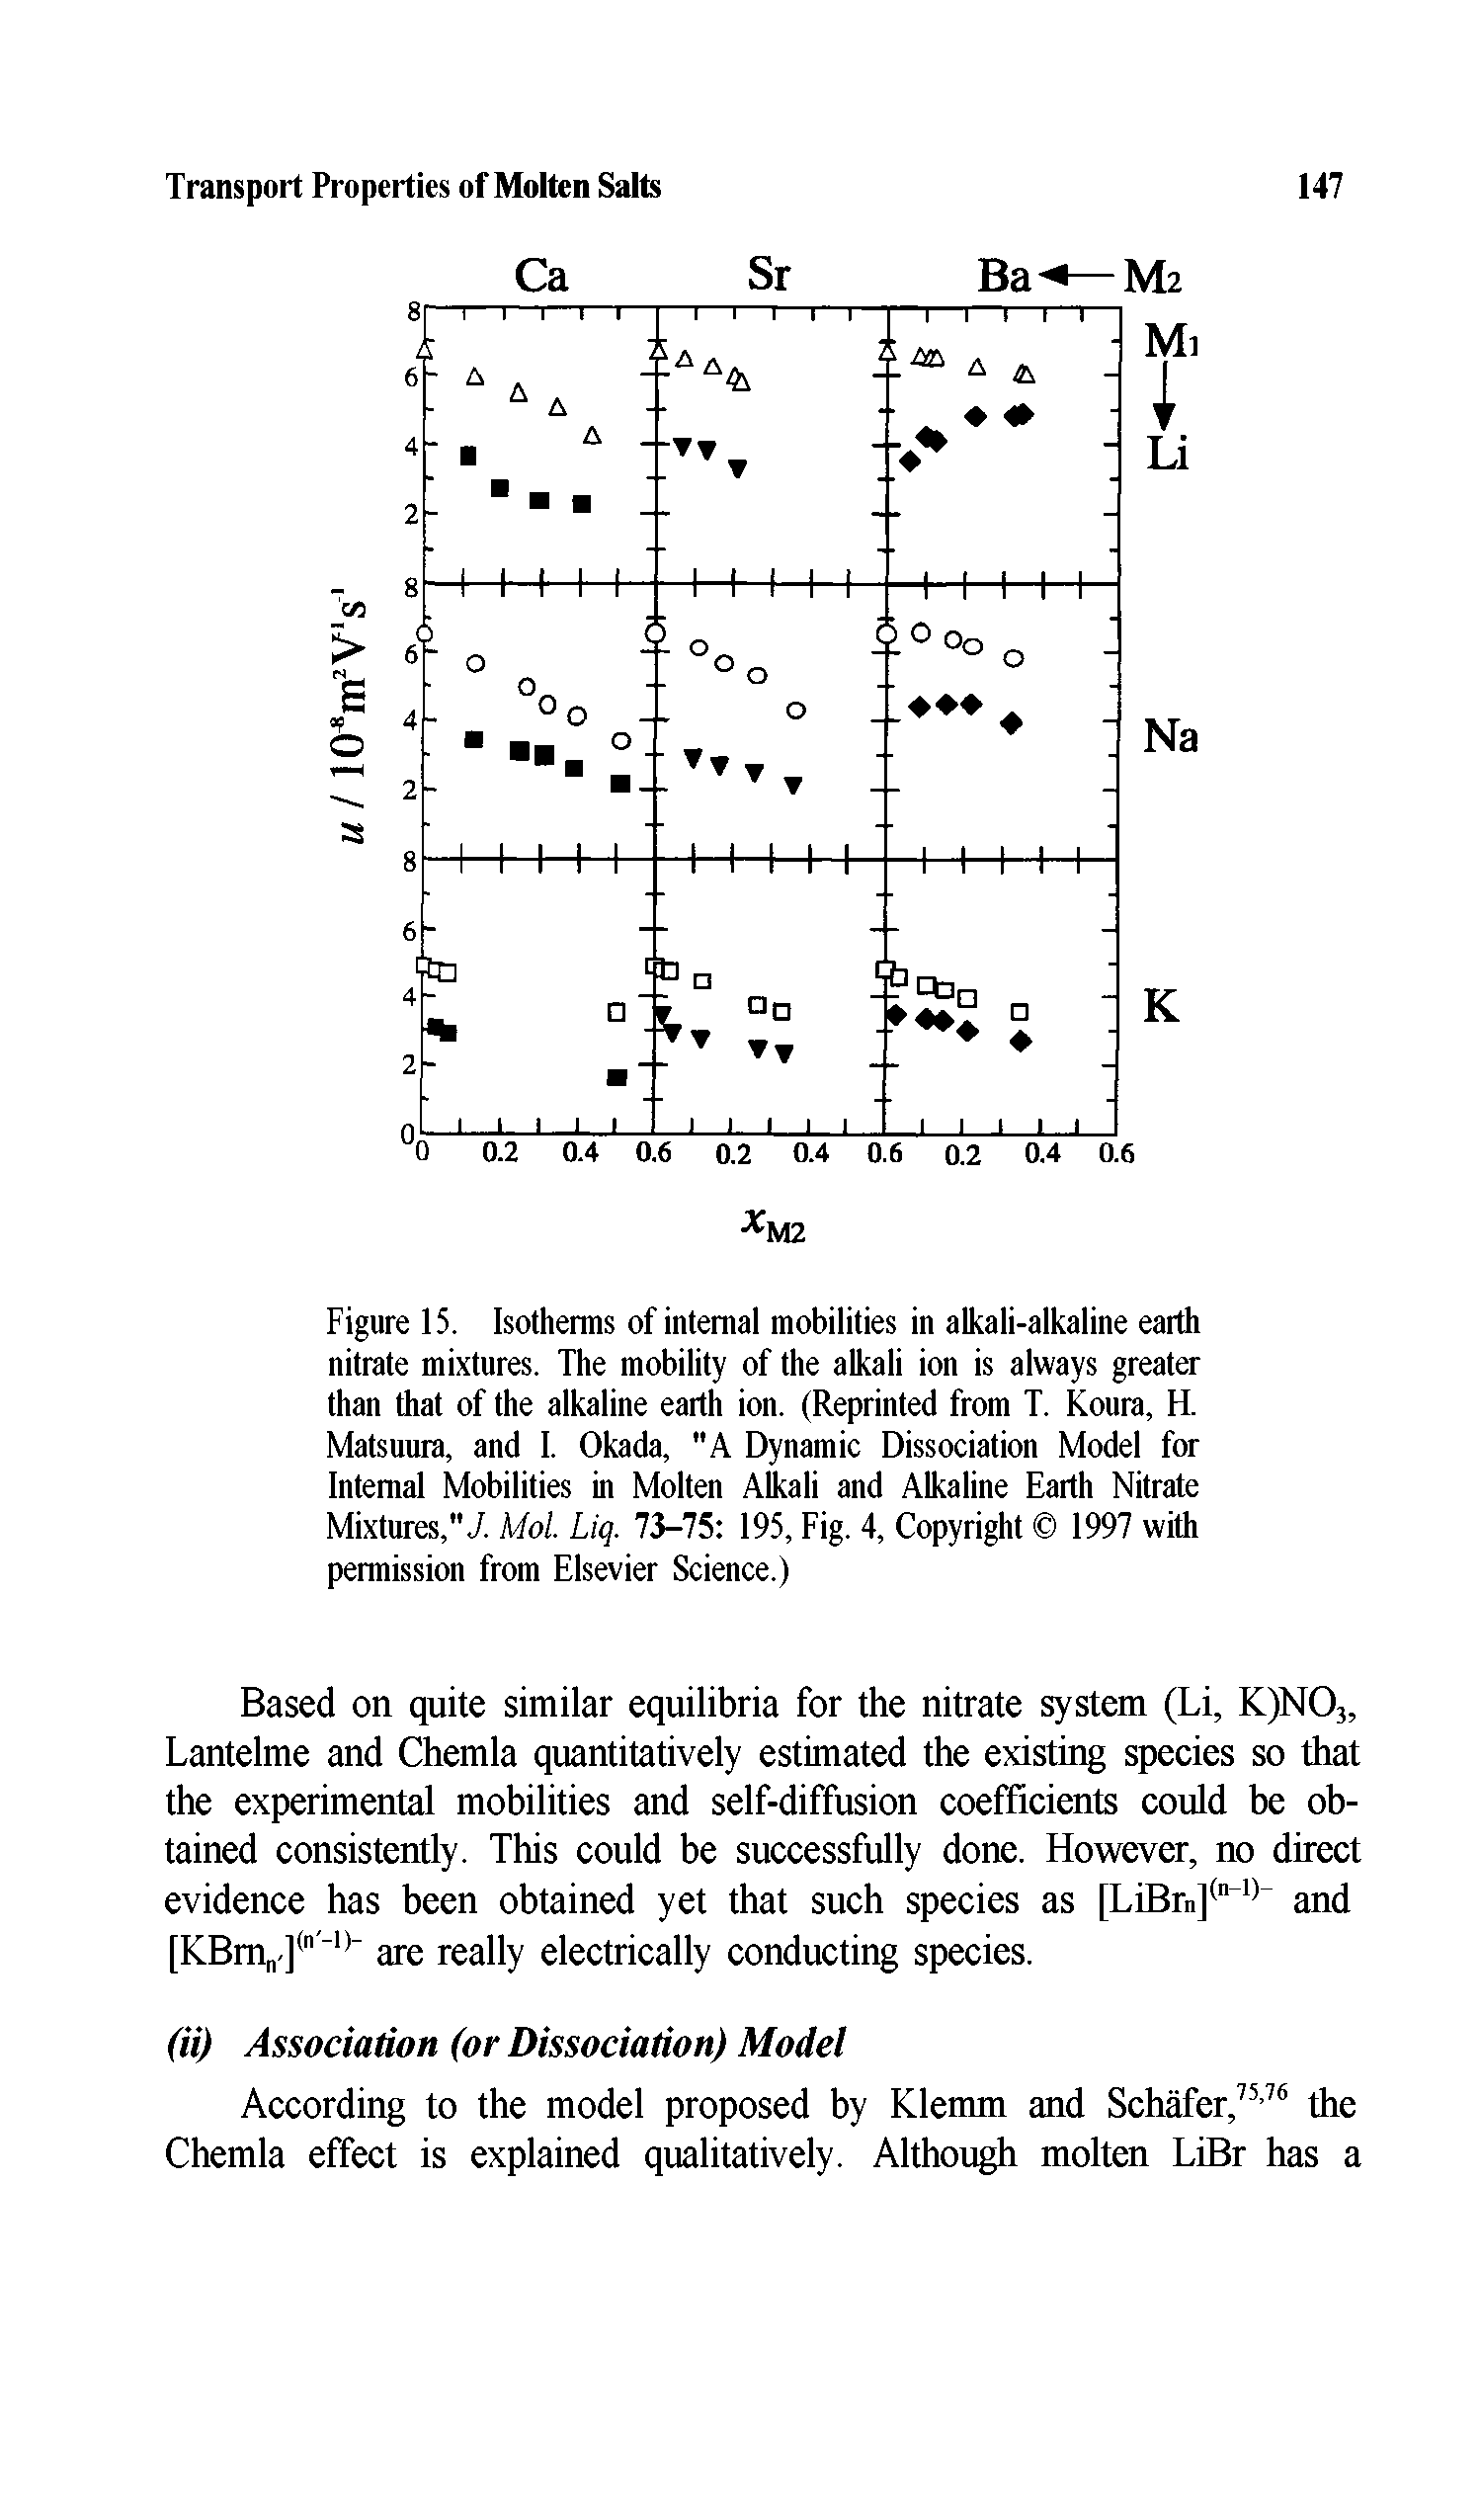 Figure 15. Isotherms of internal mobilities in alkali-alkaline earth nitrate mixtures. The mobility of the alkali ion is always greater than that of the alkaline earth ion. (Reprinted from T. Koura, H. Matsuura, and I. Okada, "A Dynamic Dissociation Model for Internal Mobilities in Molten Alkali and Alkaline Earth Nitrate Mixtures,"/ Mol. Liq. 73-75 195, Fig. 4, Copyright 1997 with permission from Elsevier Science.)...